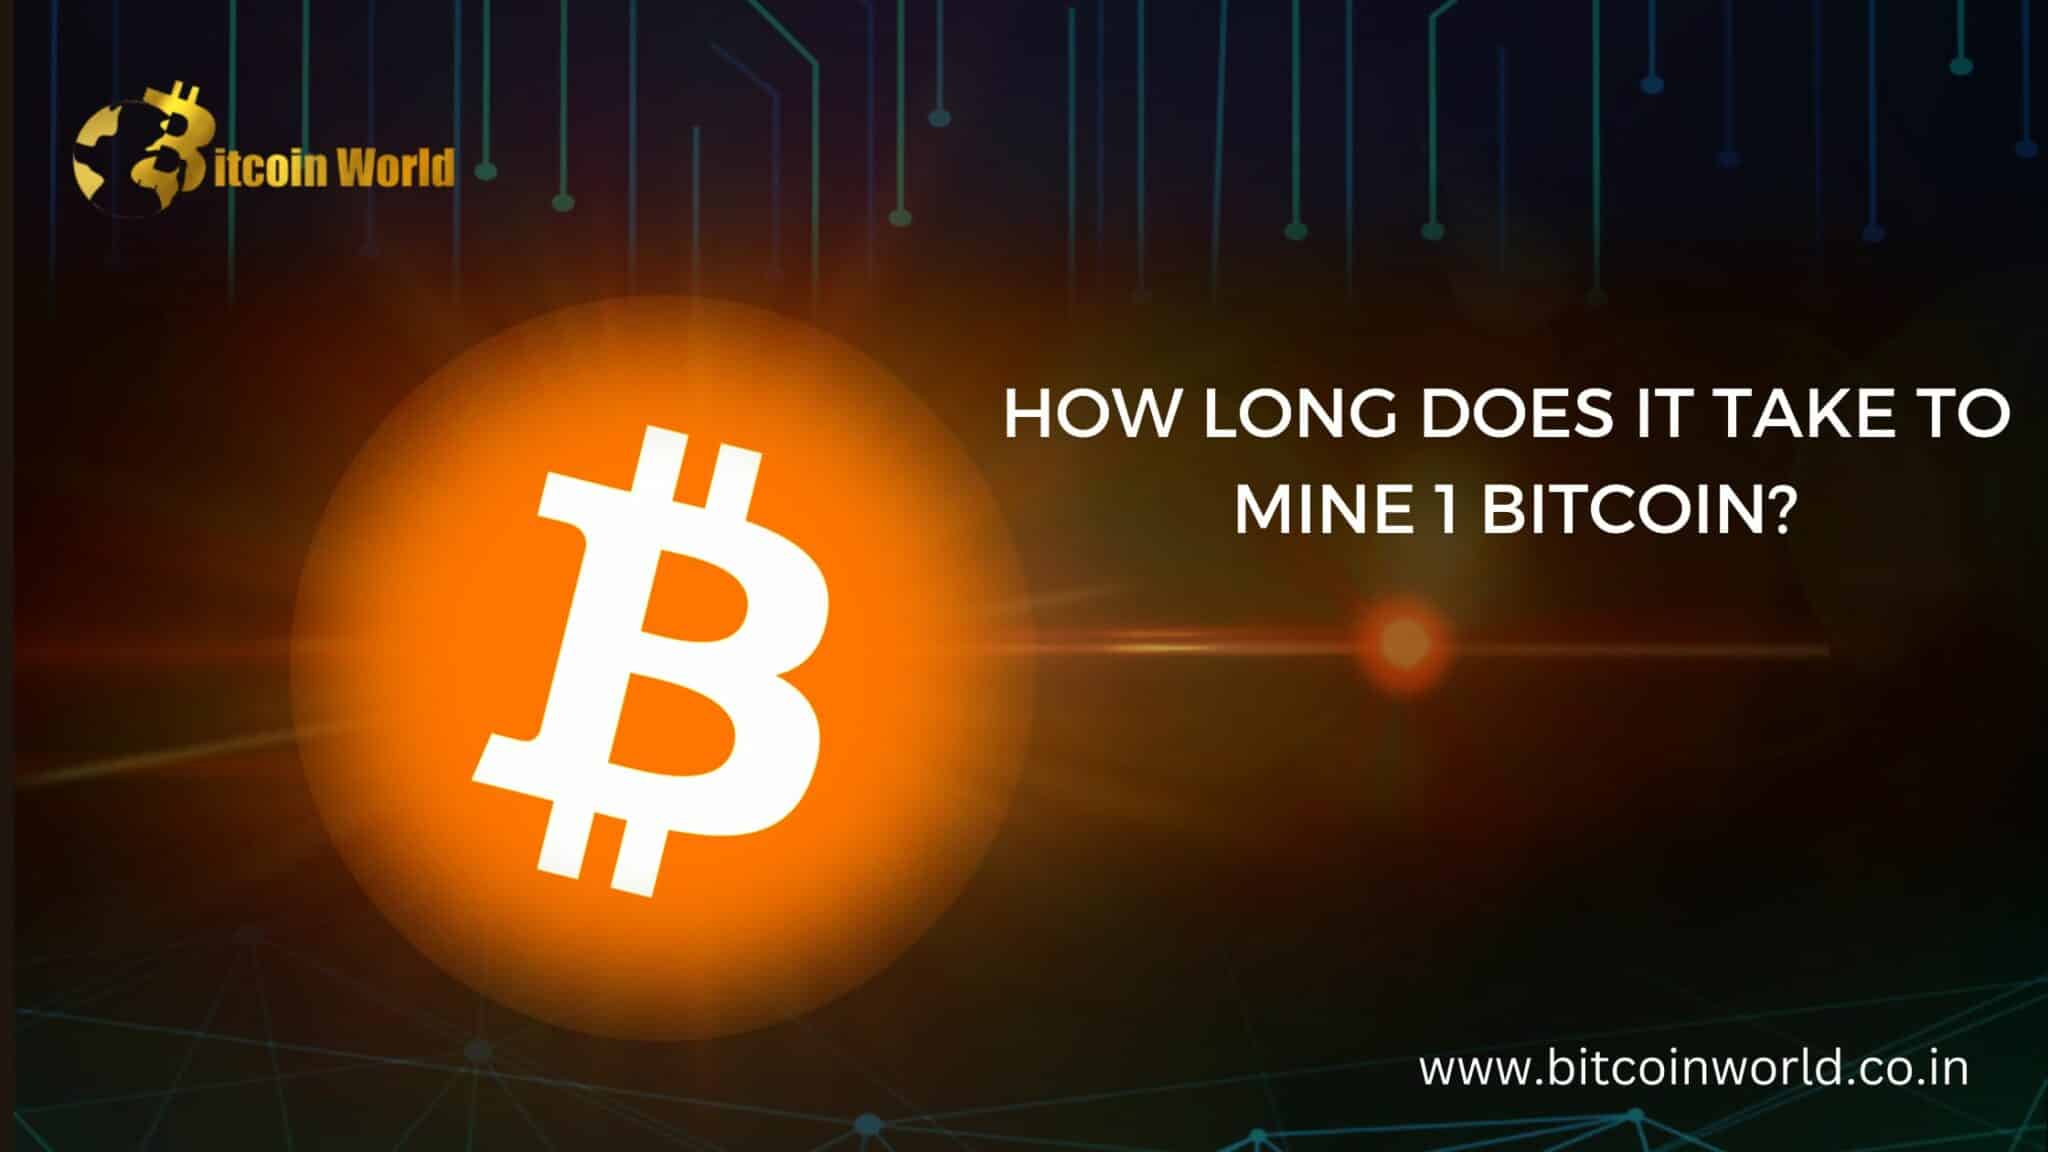 How Long does it take to mine 1 Bitcoin